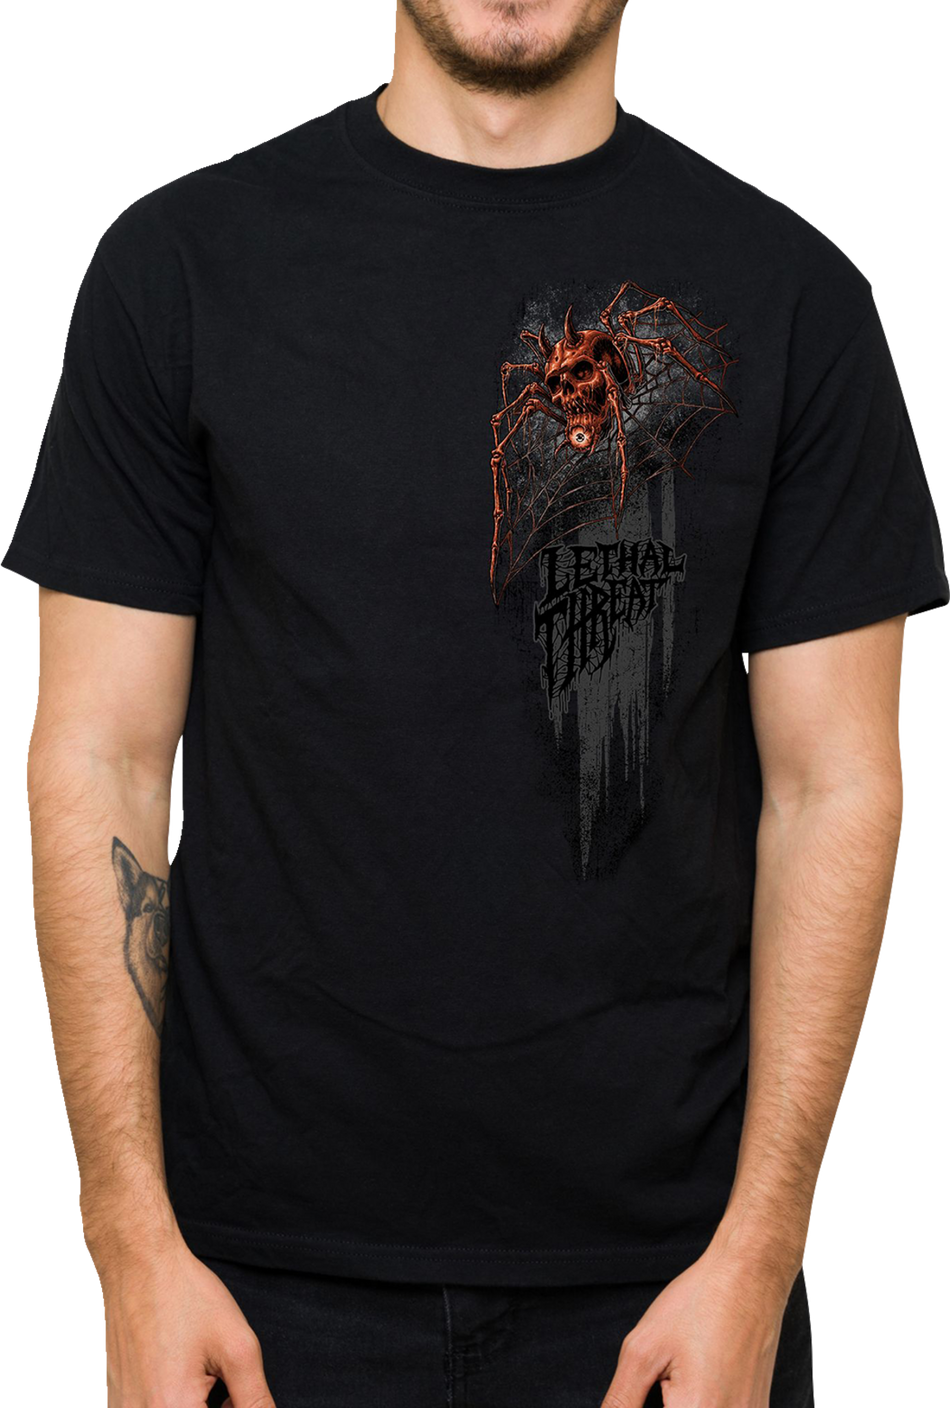 LETHAL THREAT Know Your Darkness T-Shirt - Black - 4XL LT20902-4XL